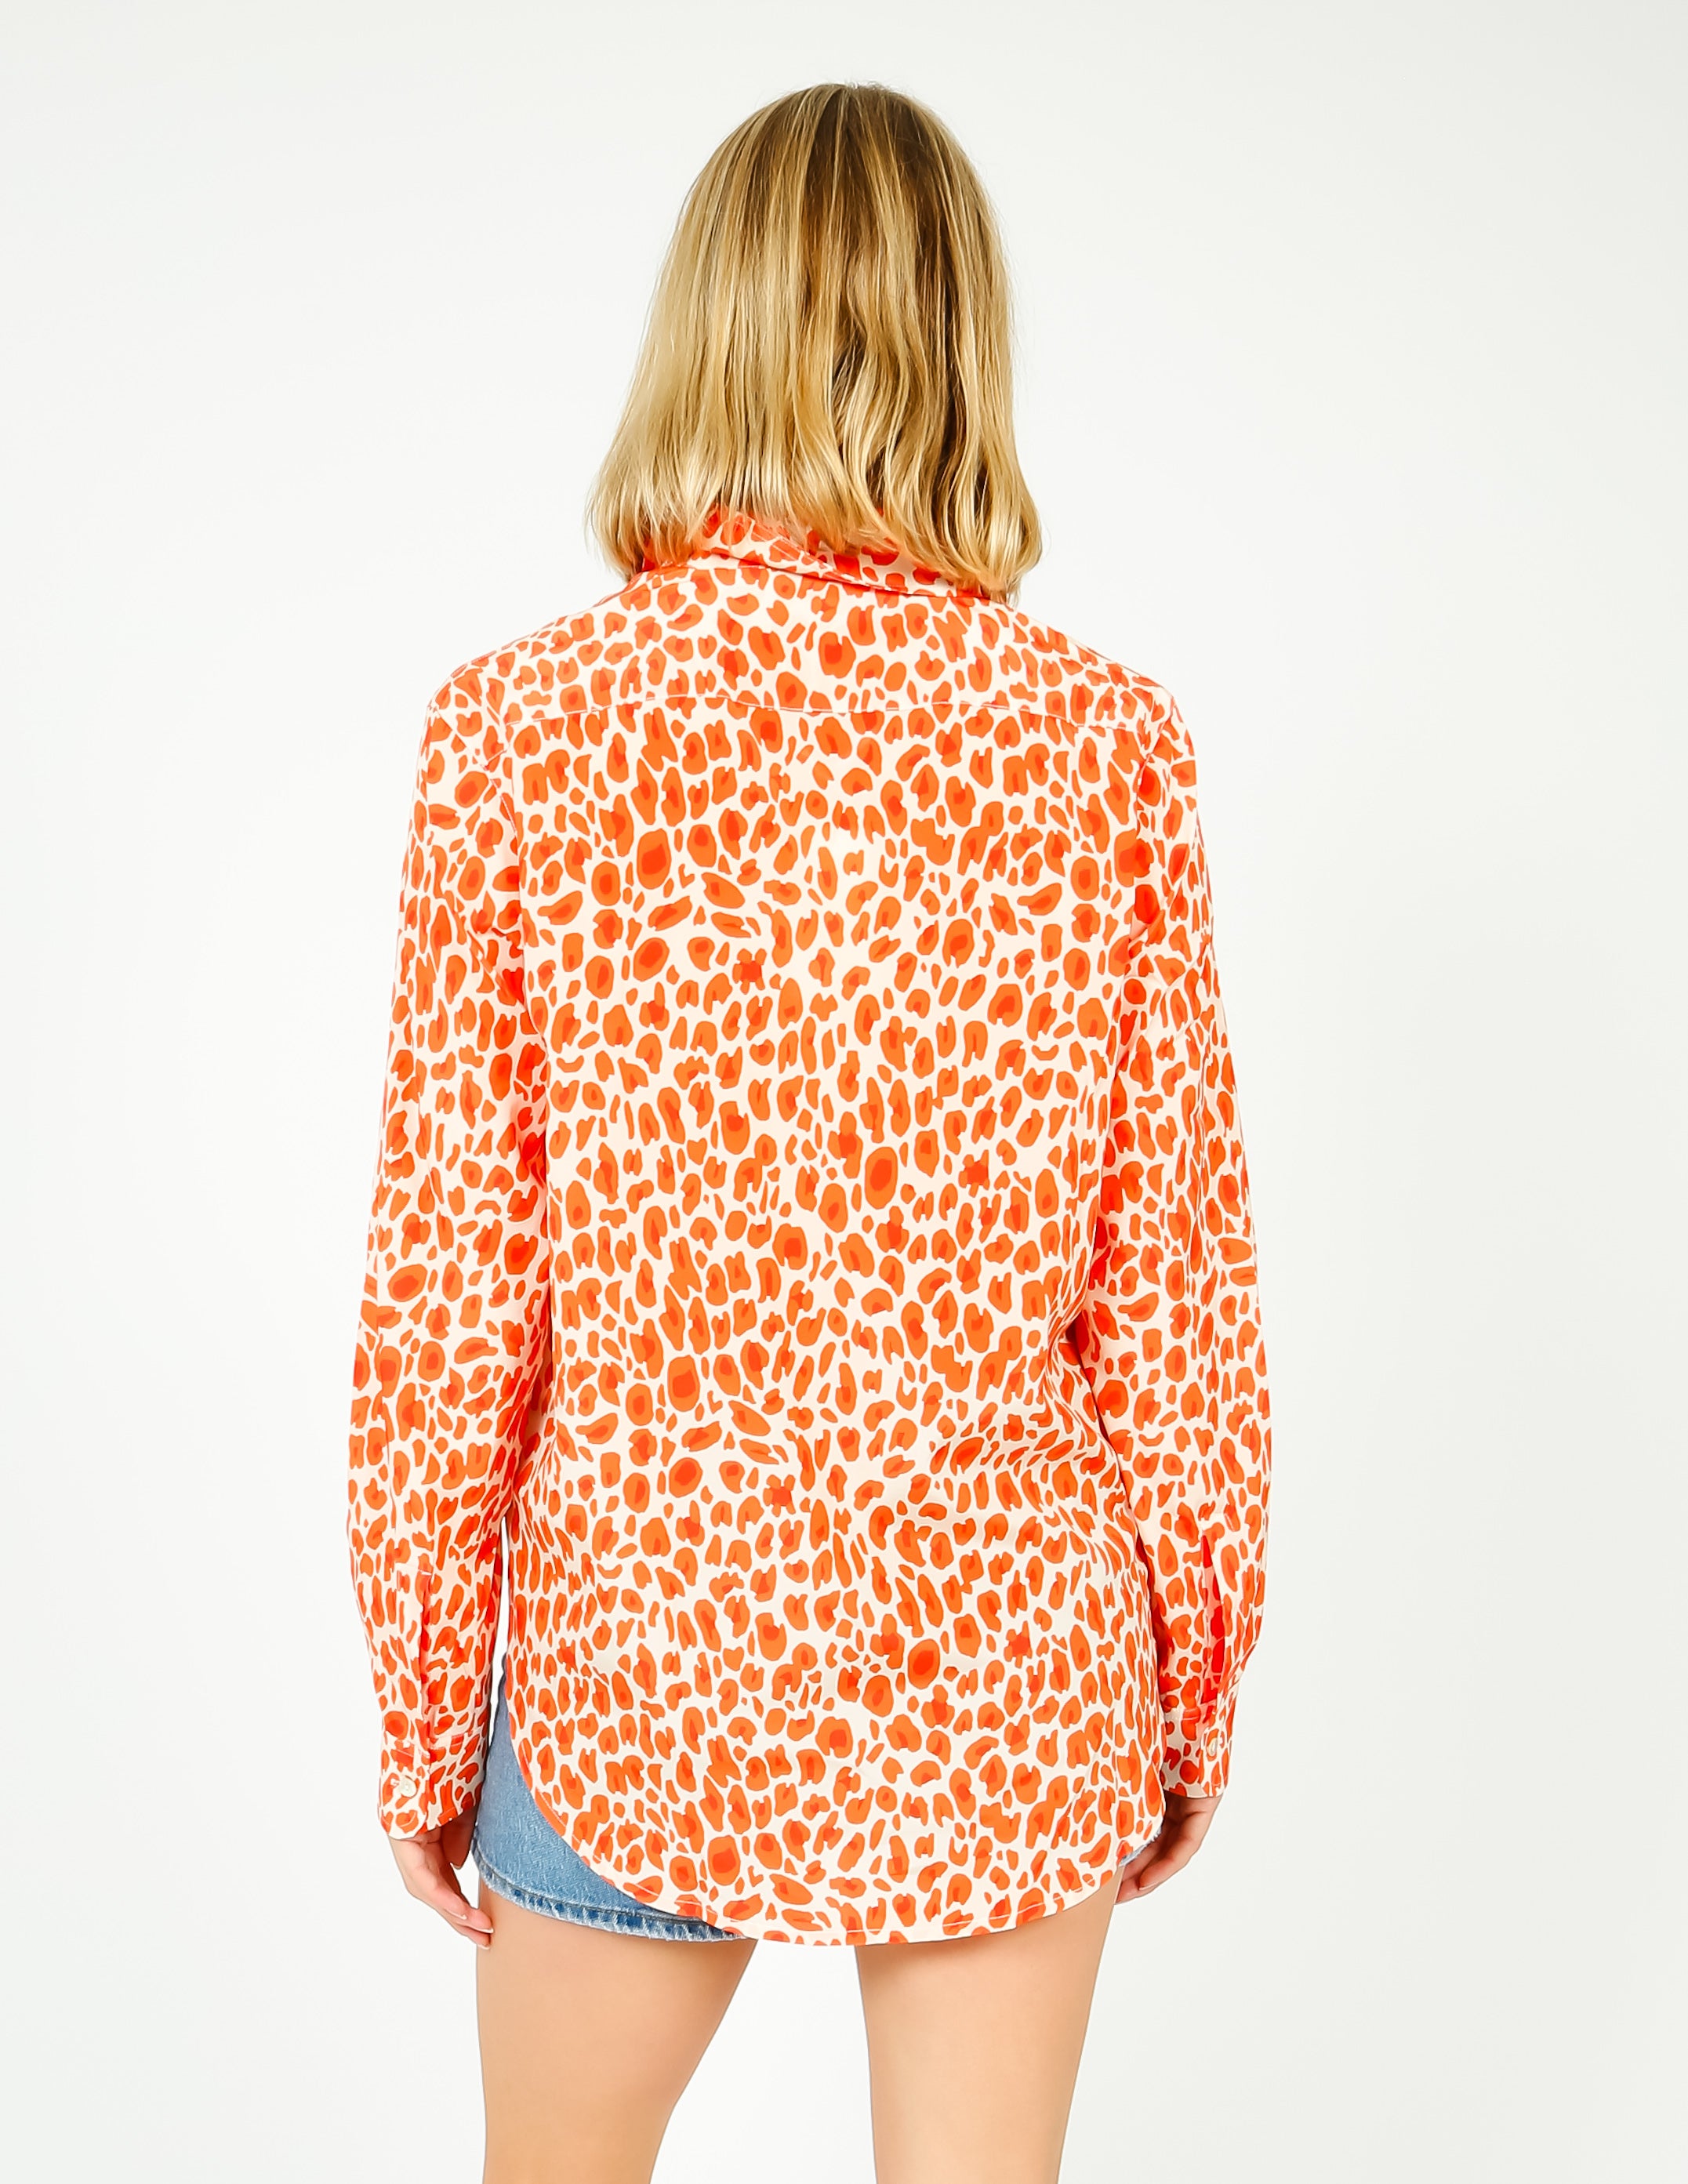 DVF Nathaniel Reversible Top in Fall Leaves